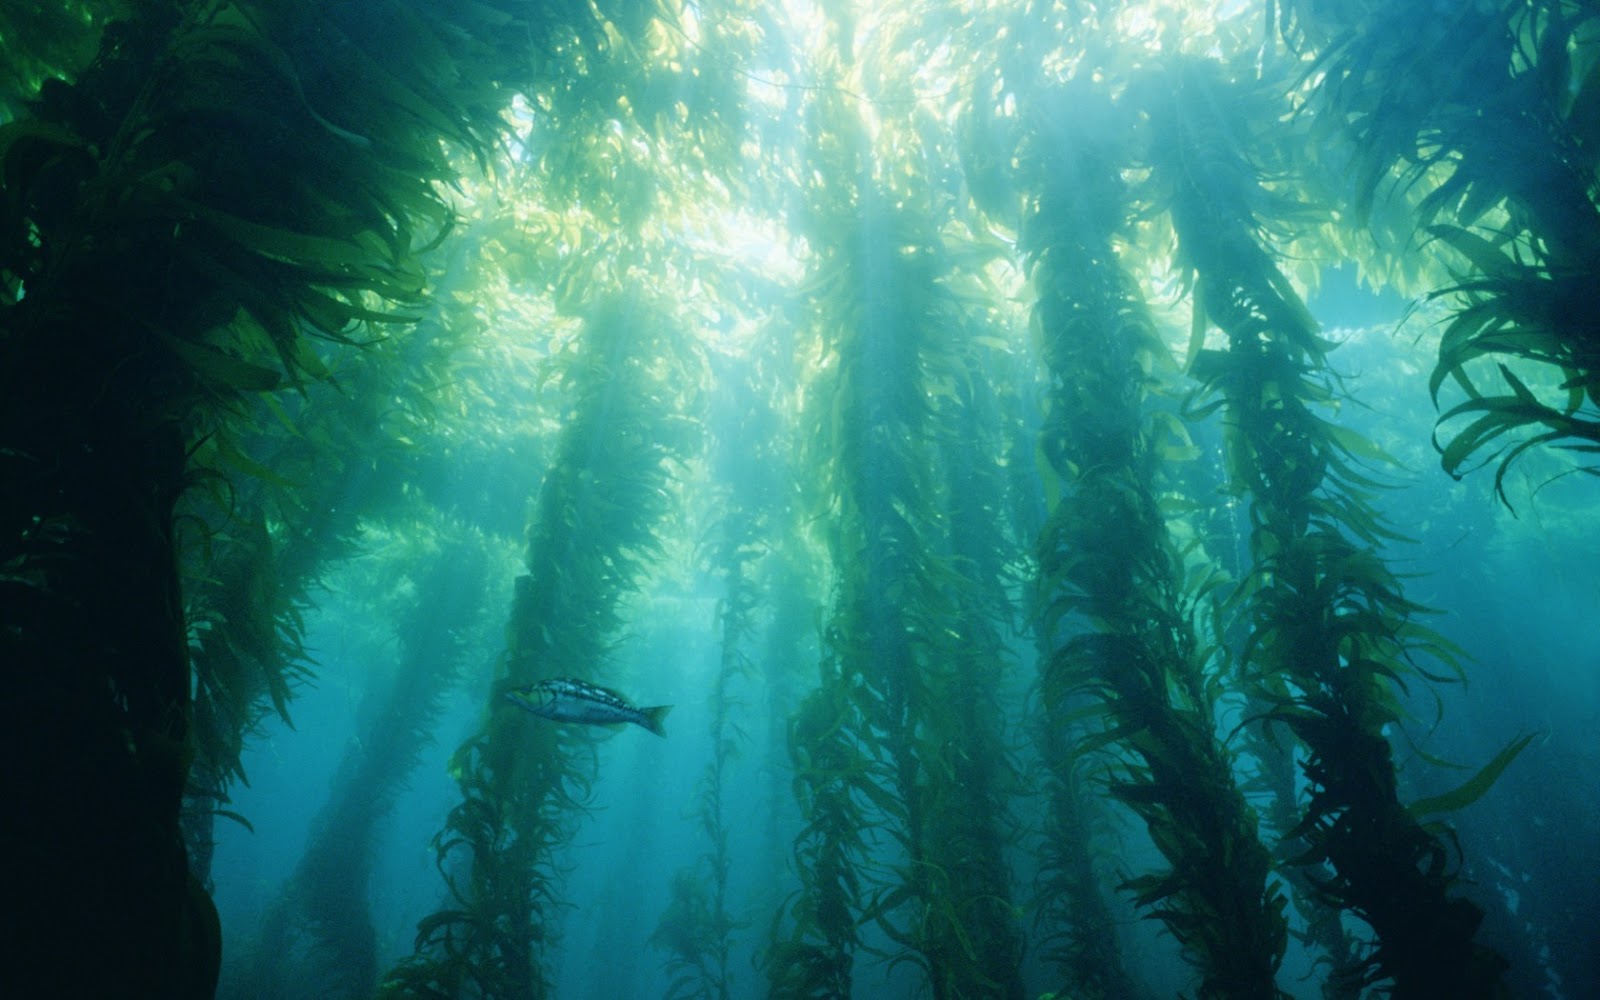 Southern California's Kelp Forests: Fall 2015 Final Project